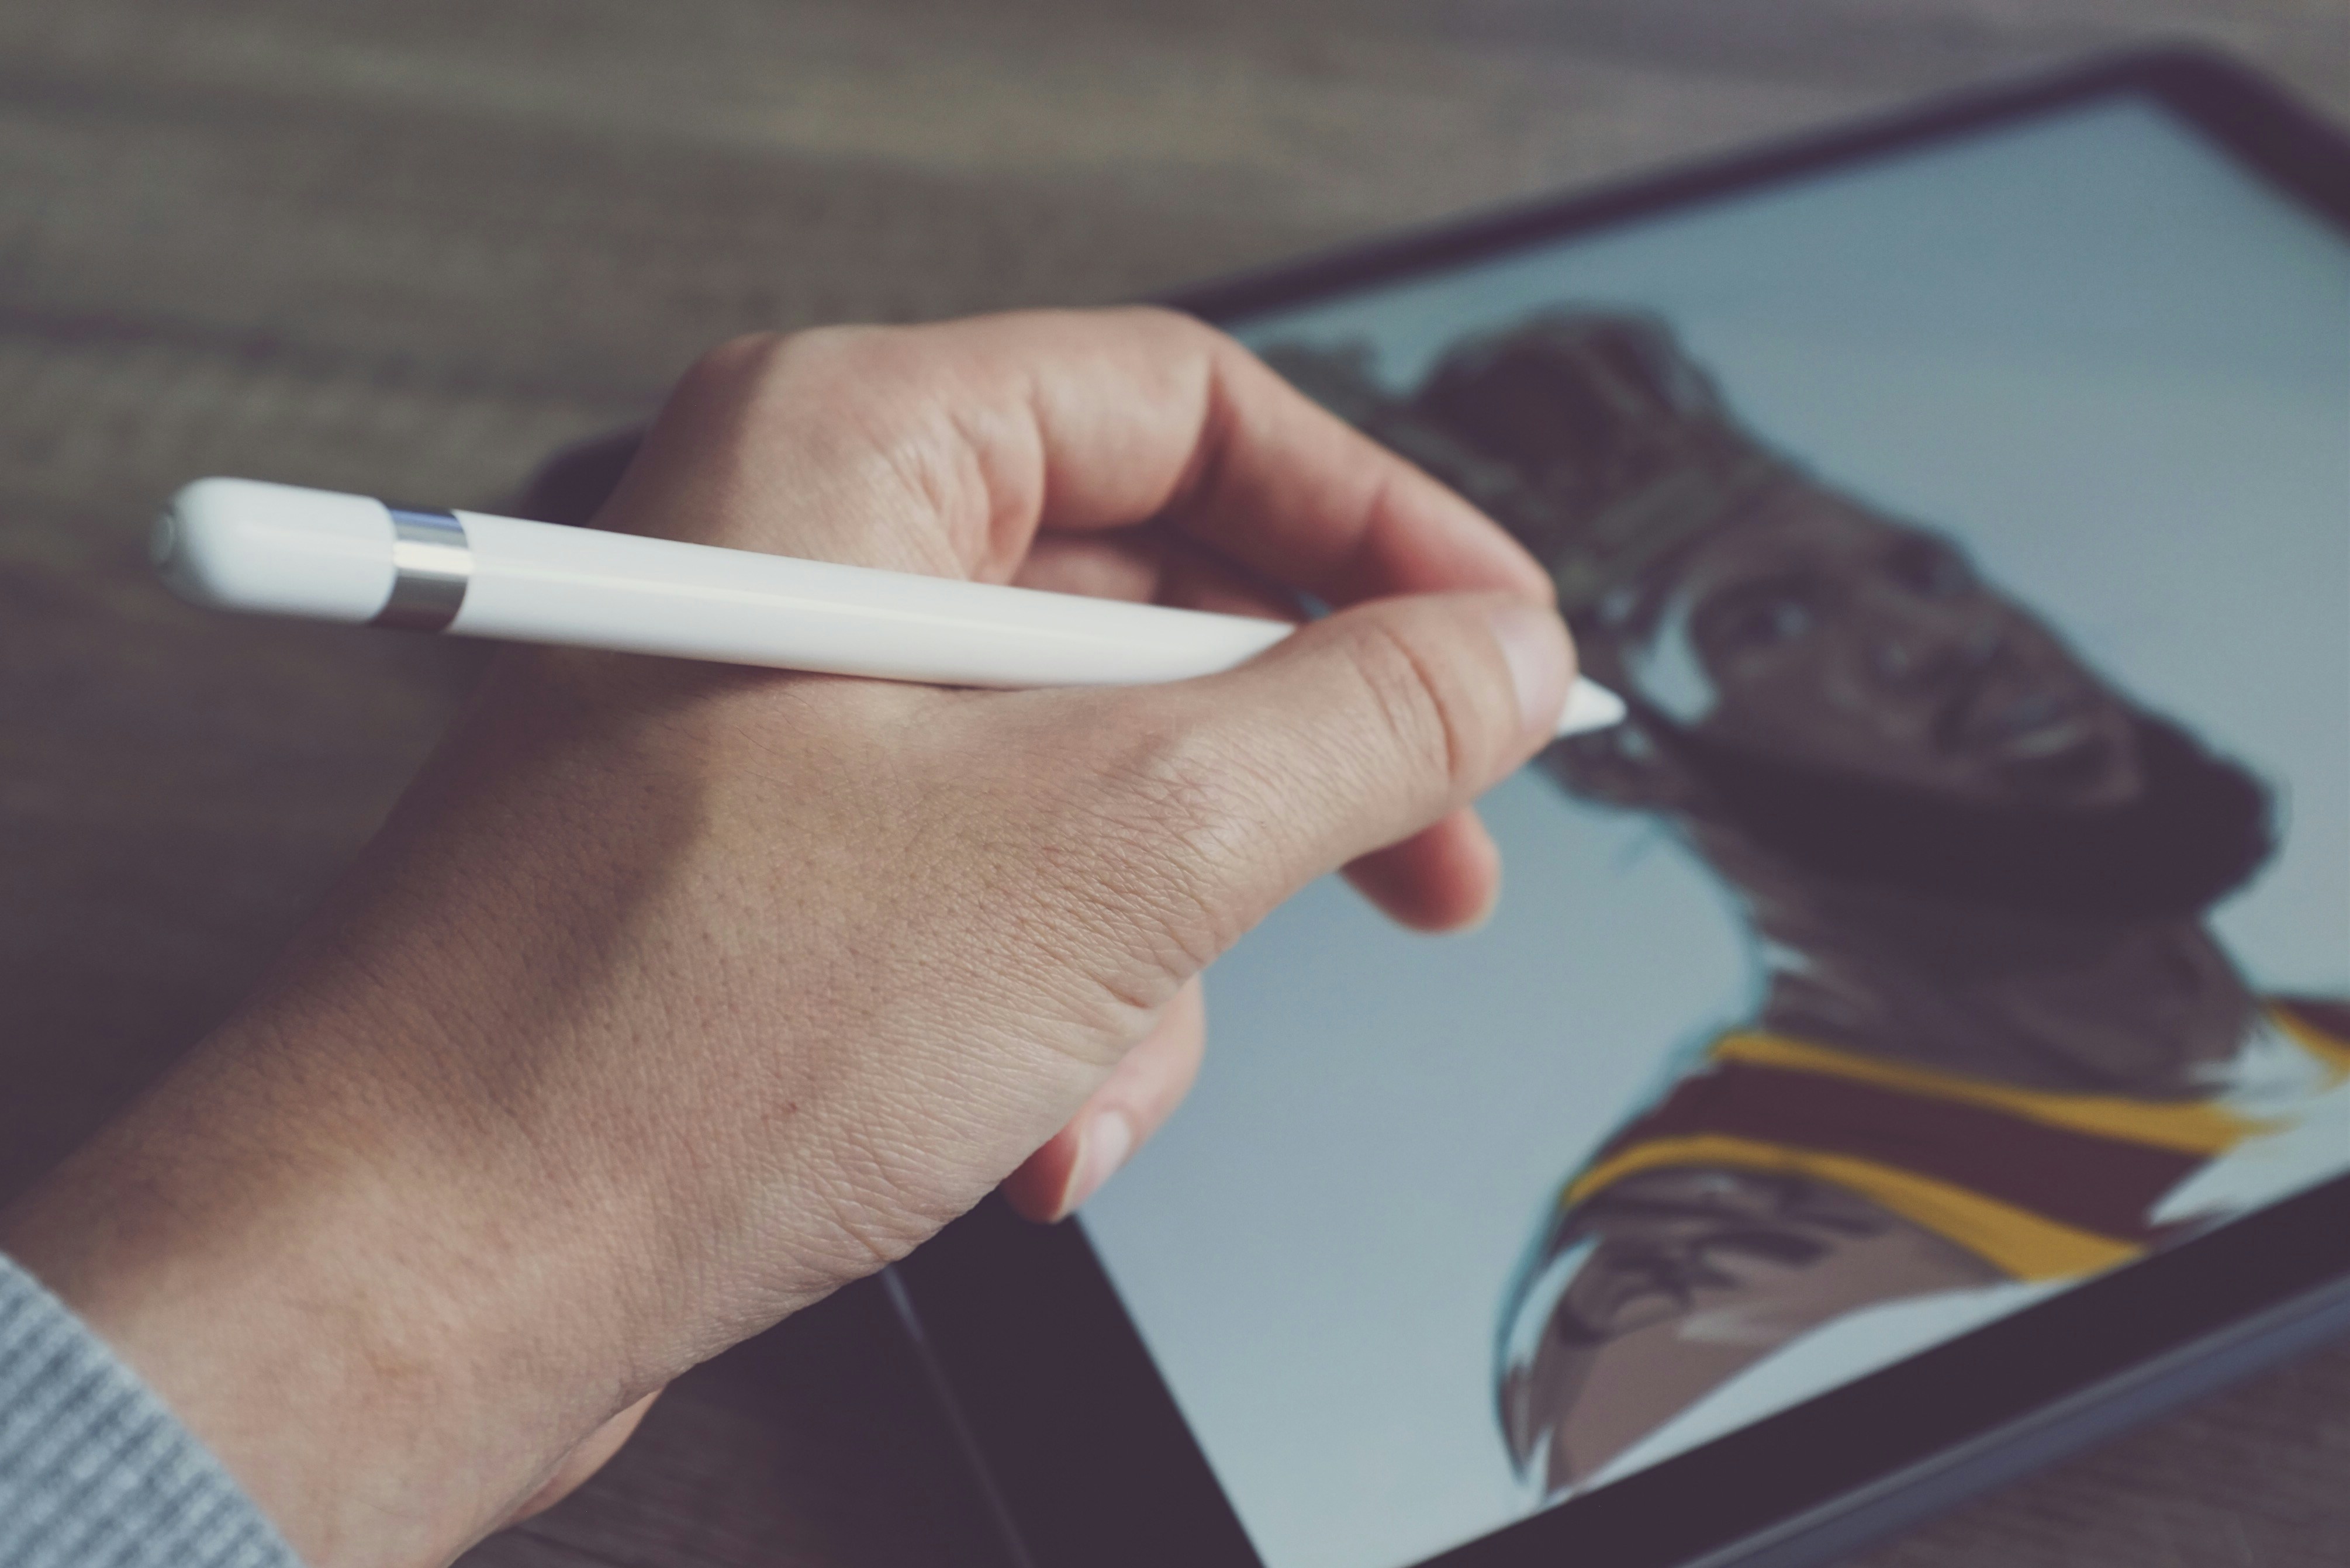 a hand holding a stylus on a tablet